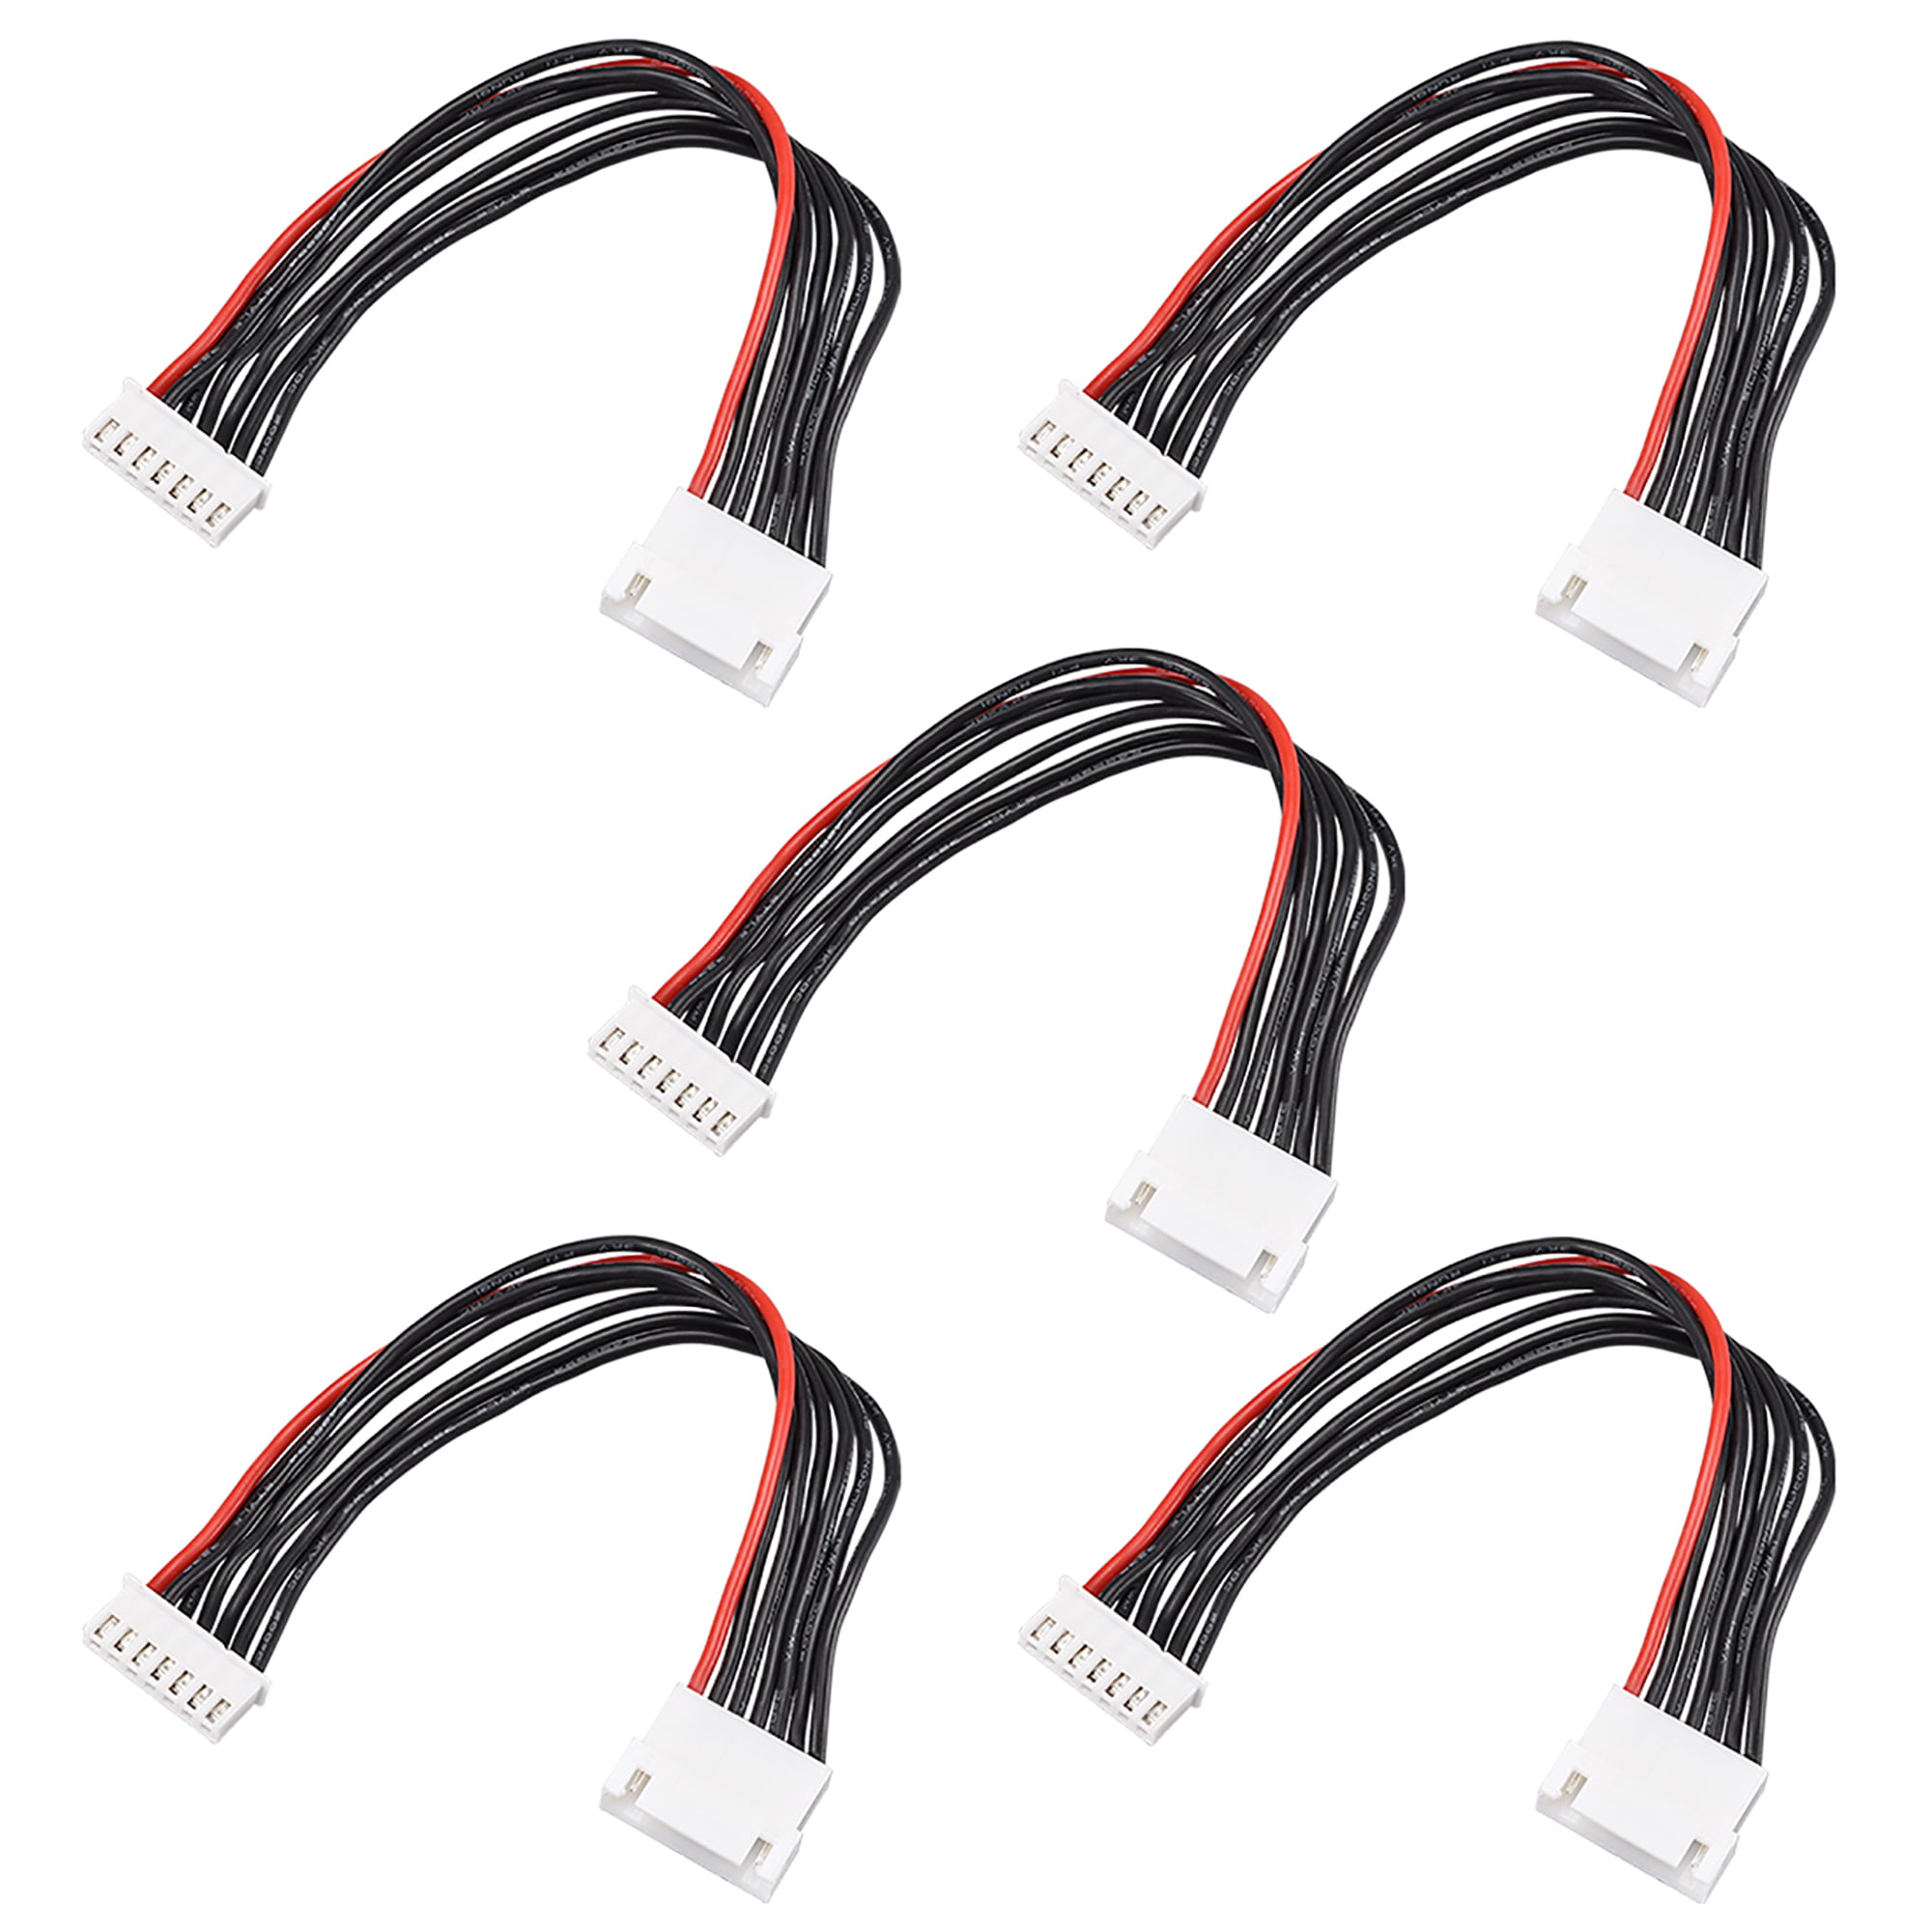 3S to 6S JST-XH LiPo Battery Balance Wire Adaptor/Splitter CHARGE FASTER